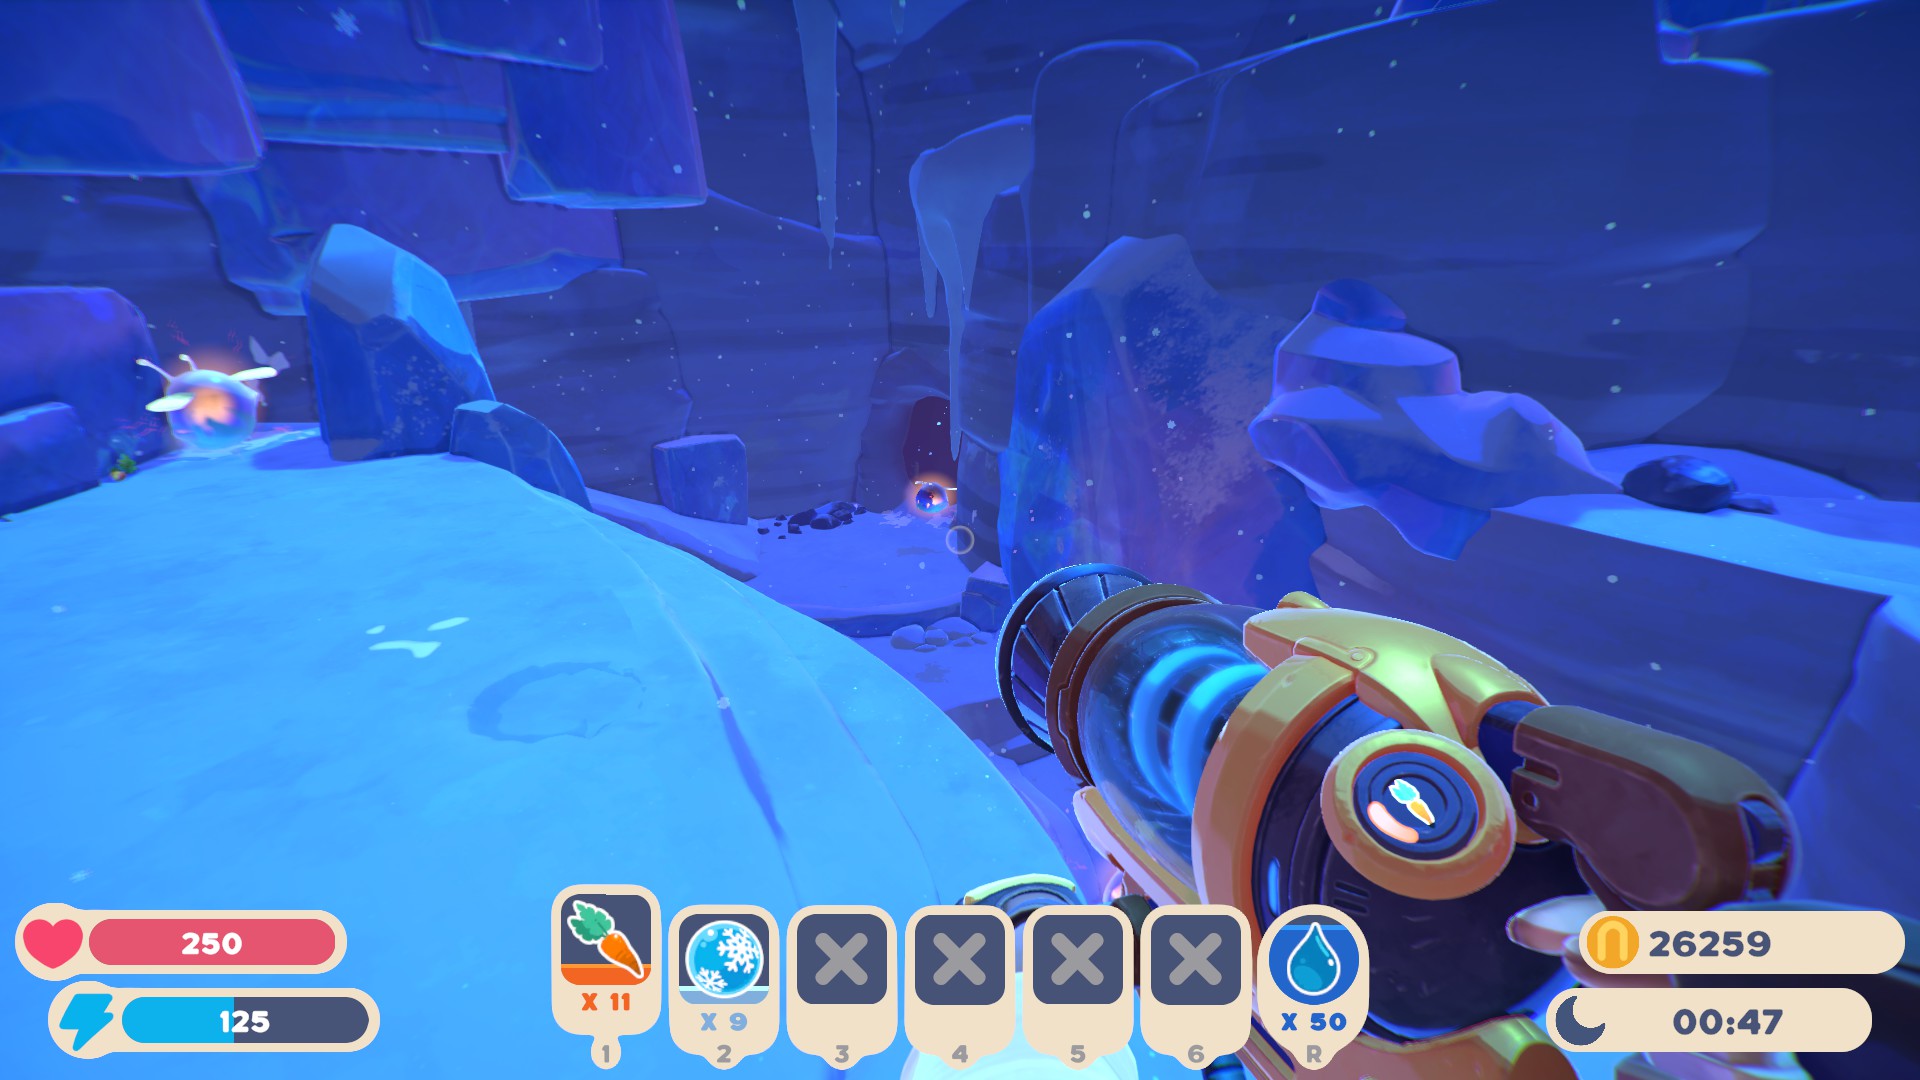 Slime Rancher 2 - Capsule Locations for Powderfall Bluffs - Pods 7 - 12 (Underground) - 8C51124